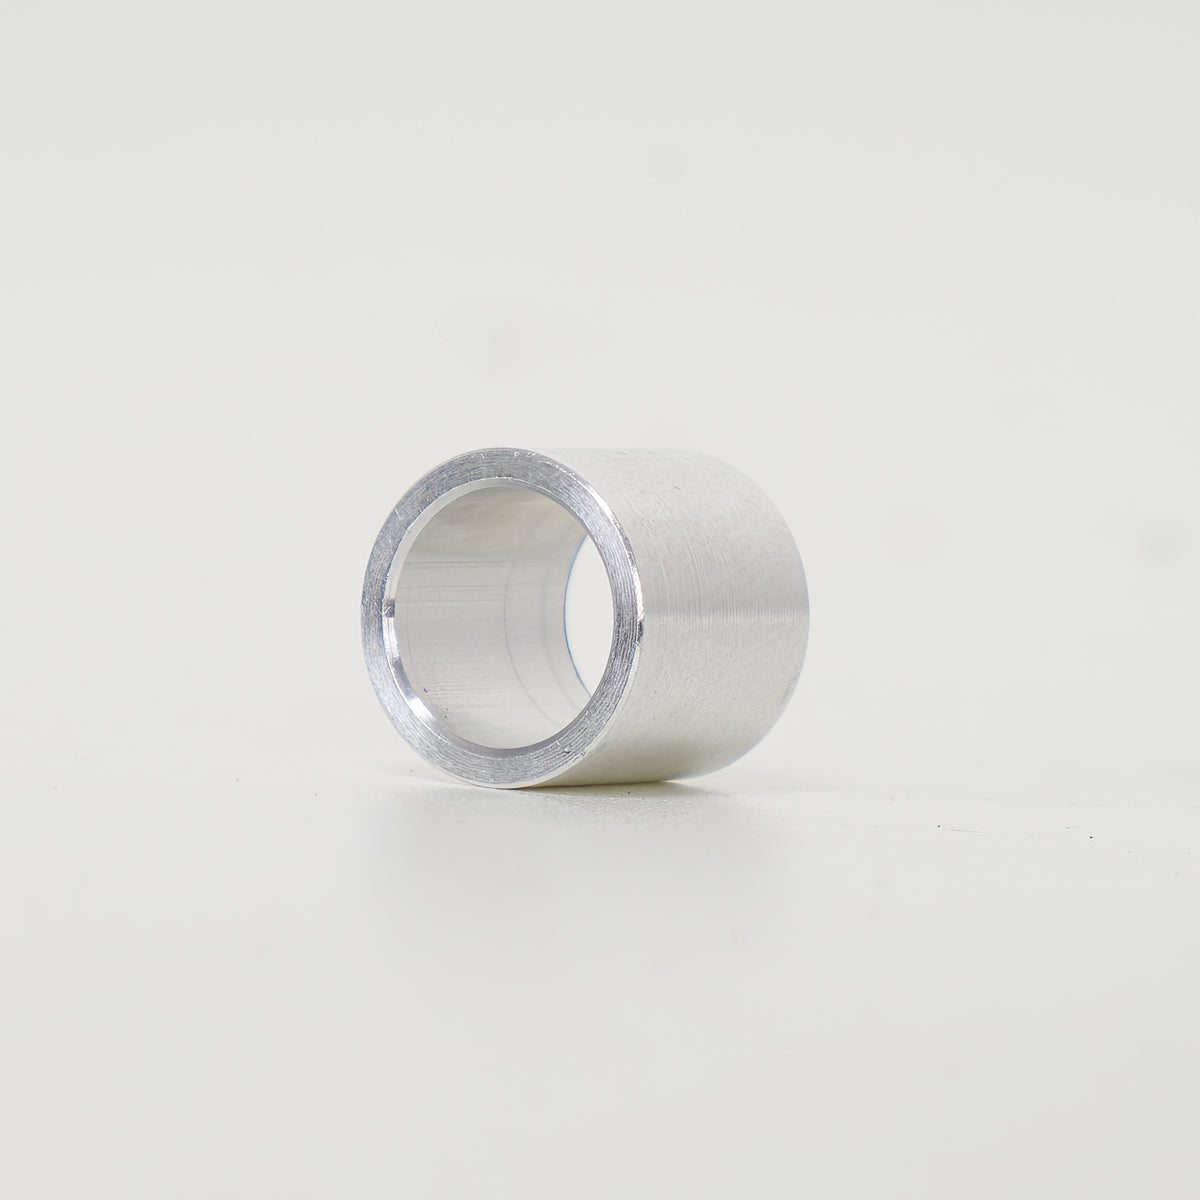 Undercover Bearing Spacer - 10mm (Singles)